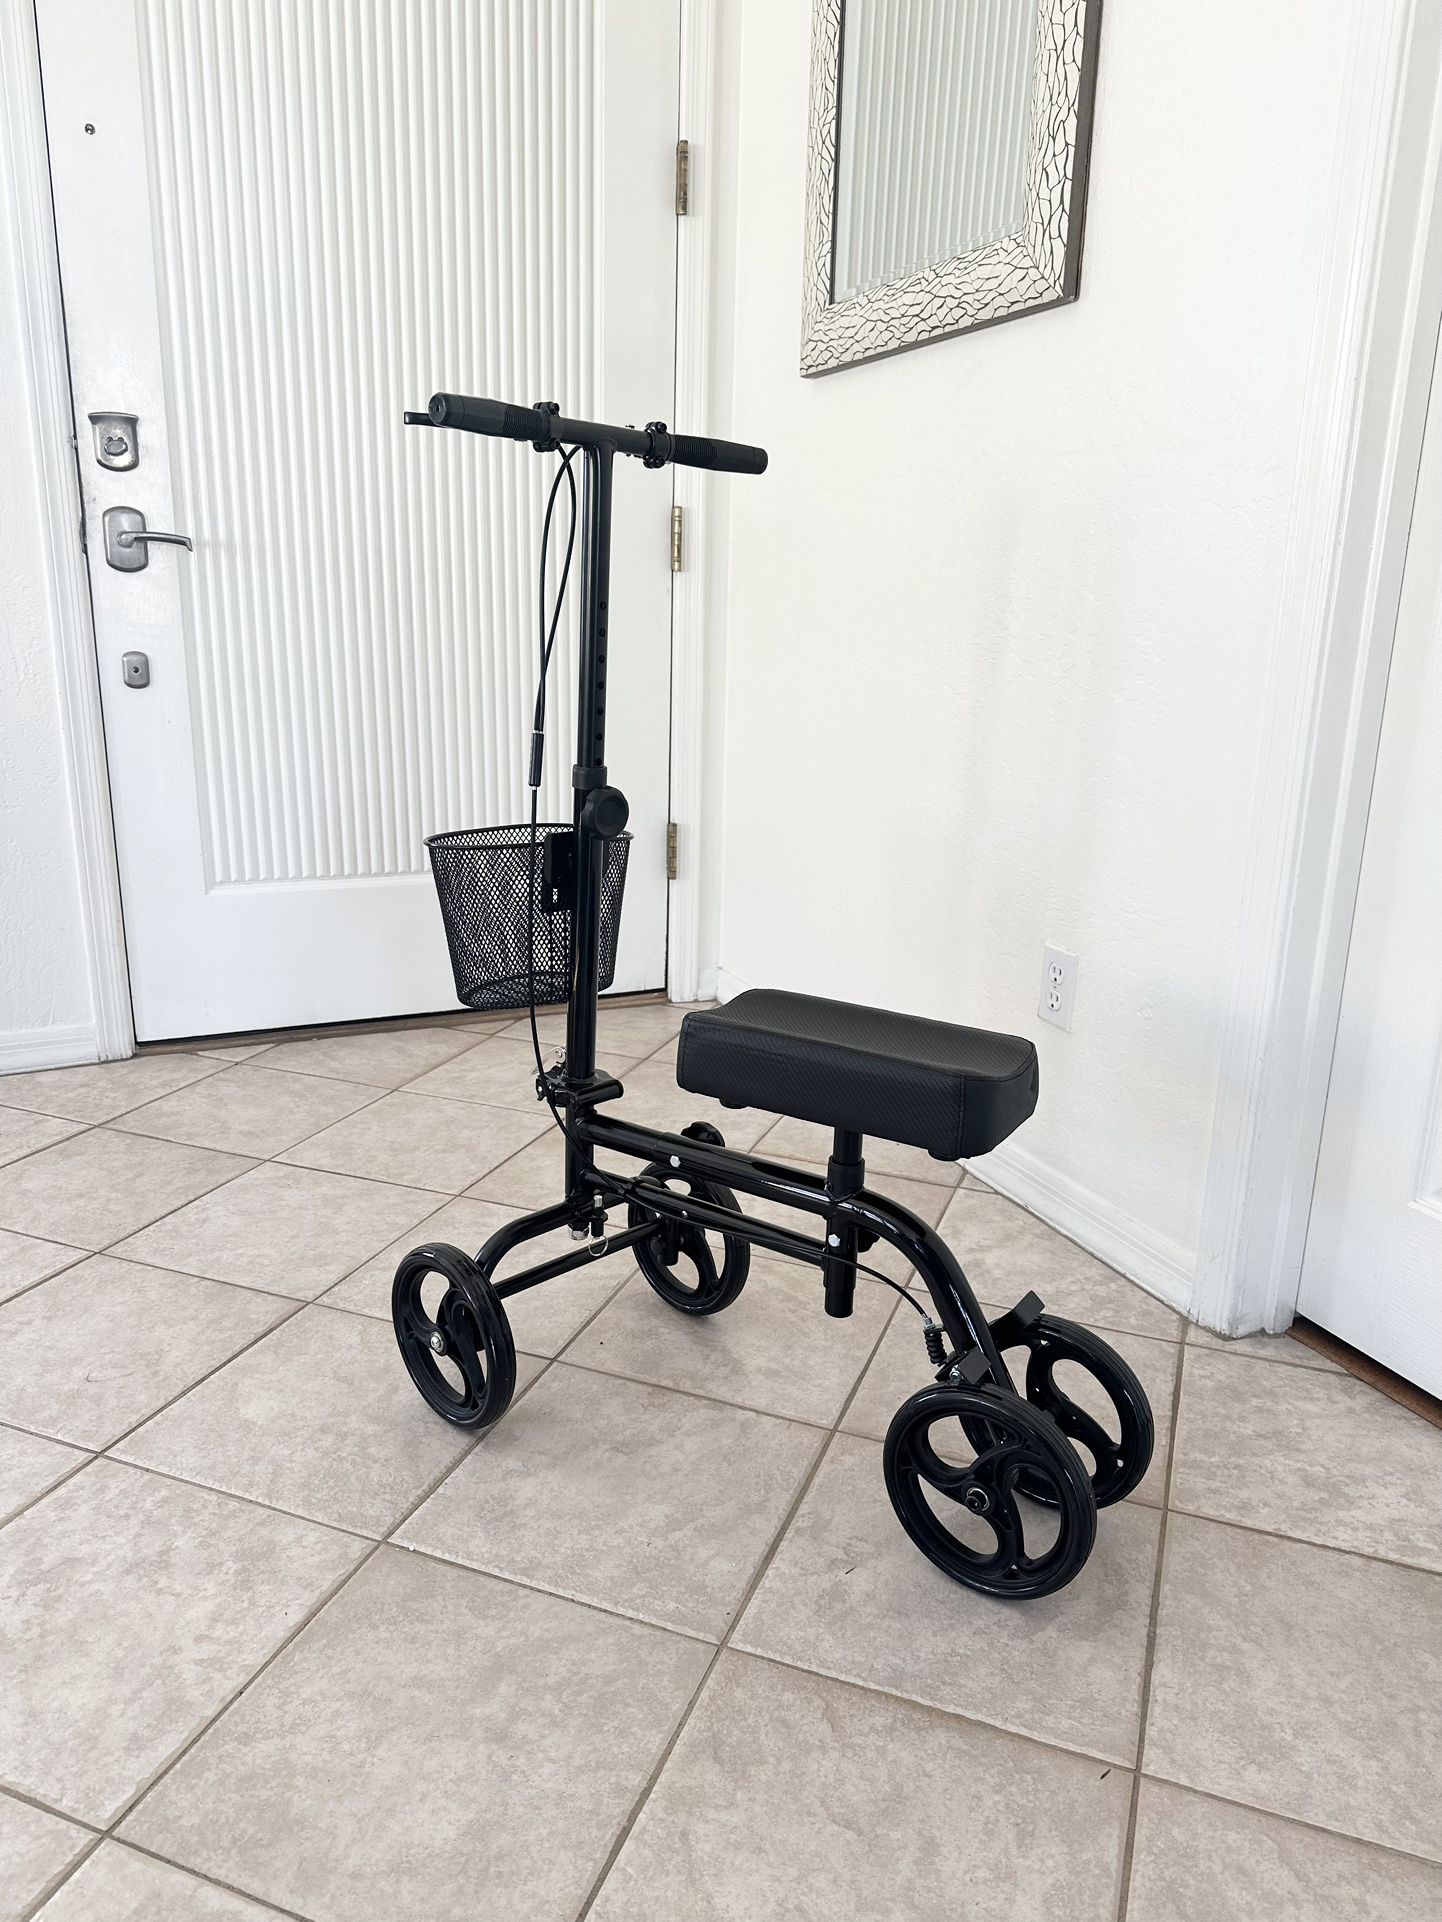 Black Steerable Knee Walker Roller Scooter with Basket Dual Braking System for Angle and Injured Foot Broken Economy Mobility  Brand New 